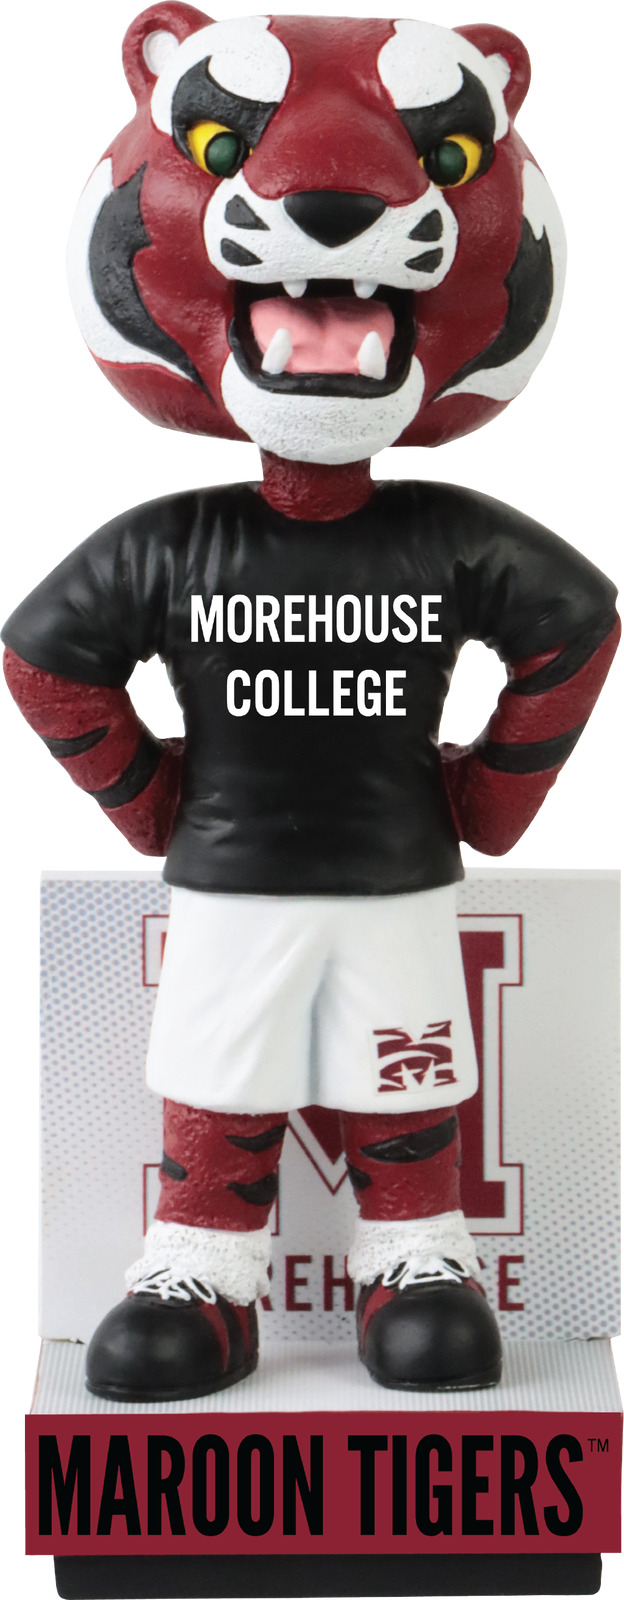 Bobby Morehouse Maroon Tigers HBCU Bobblehead NCAA College